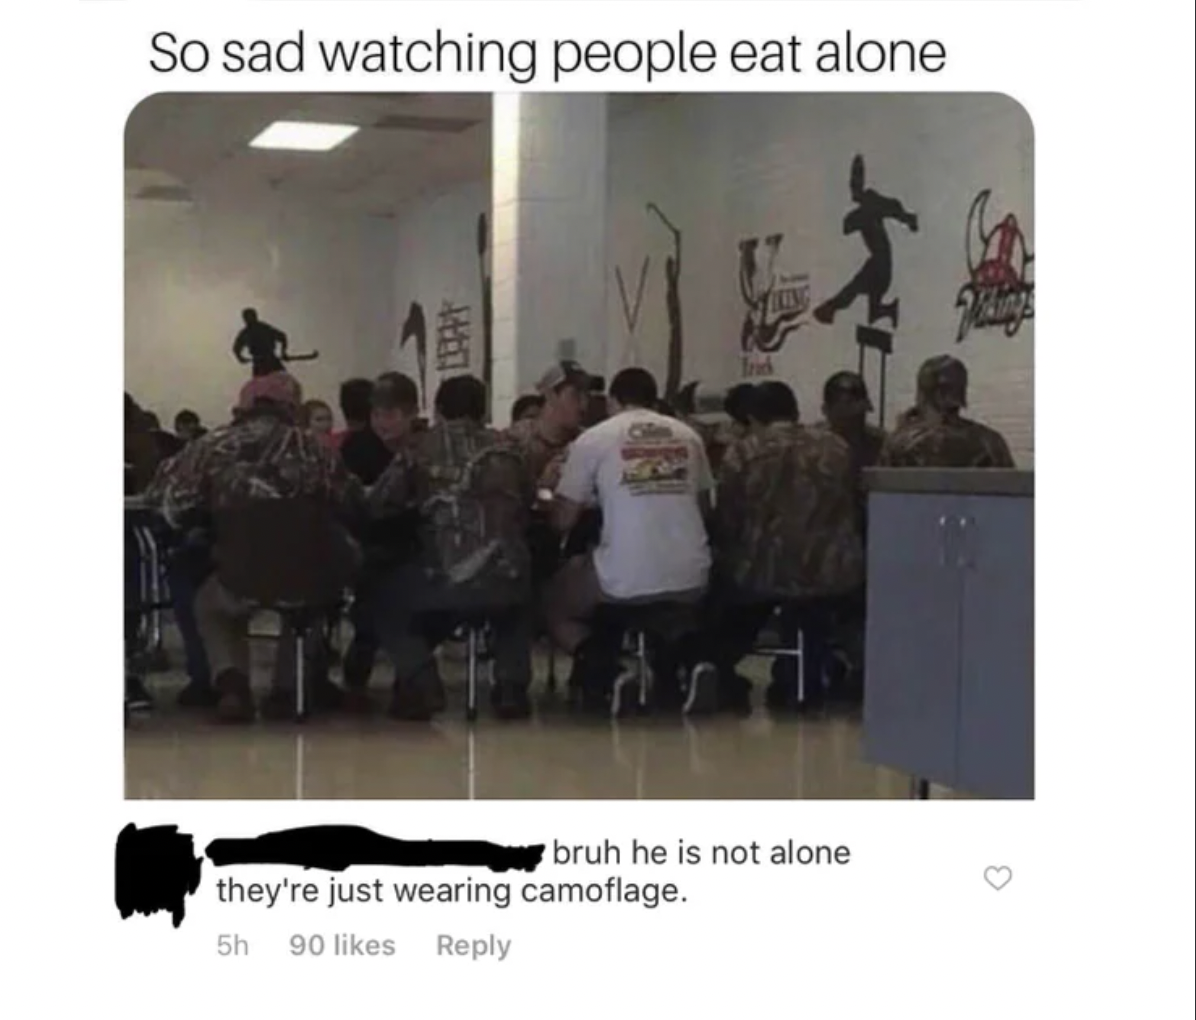 Missed Joke - so sad to see someone eating alone - So sad watching people eat alone  he is not alone they're just wearing